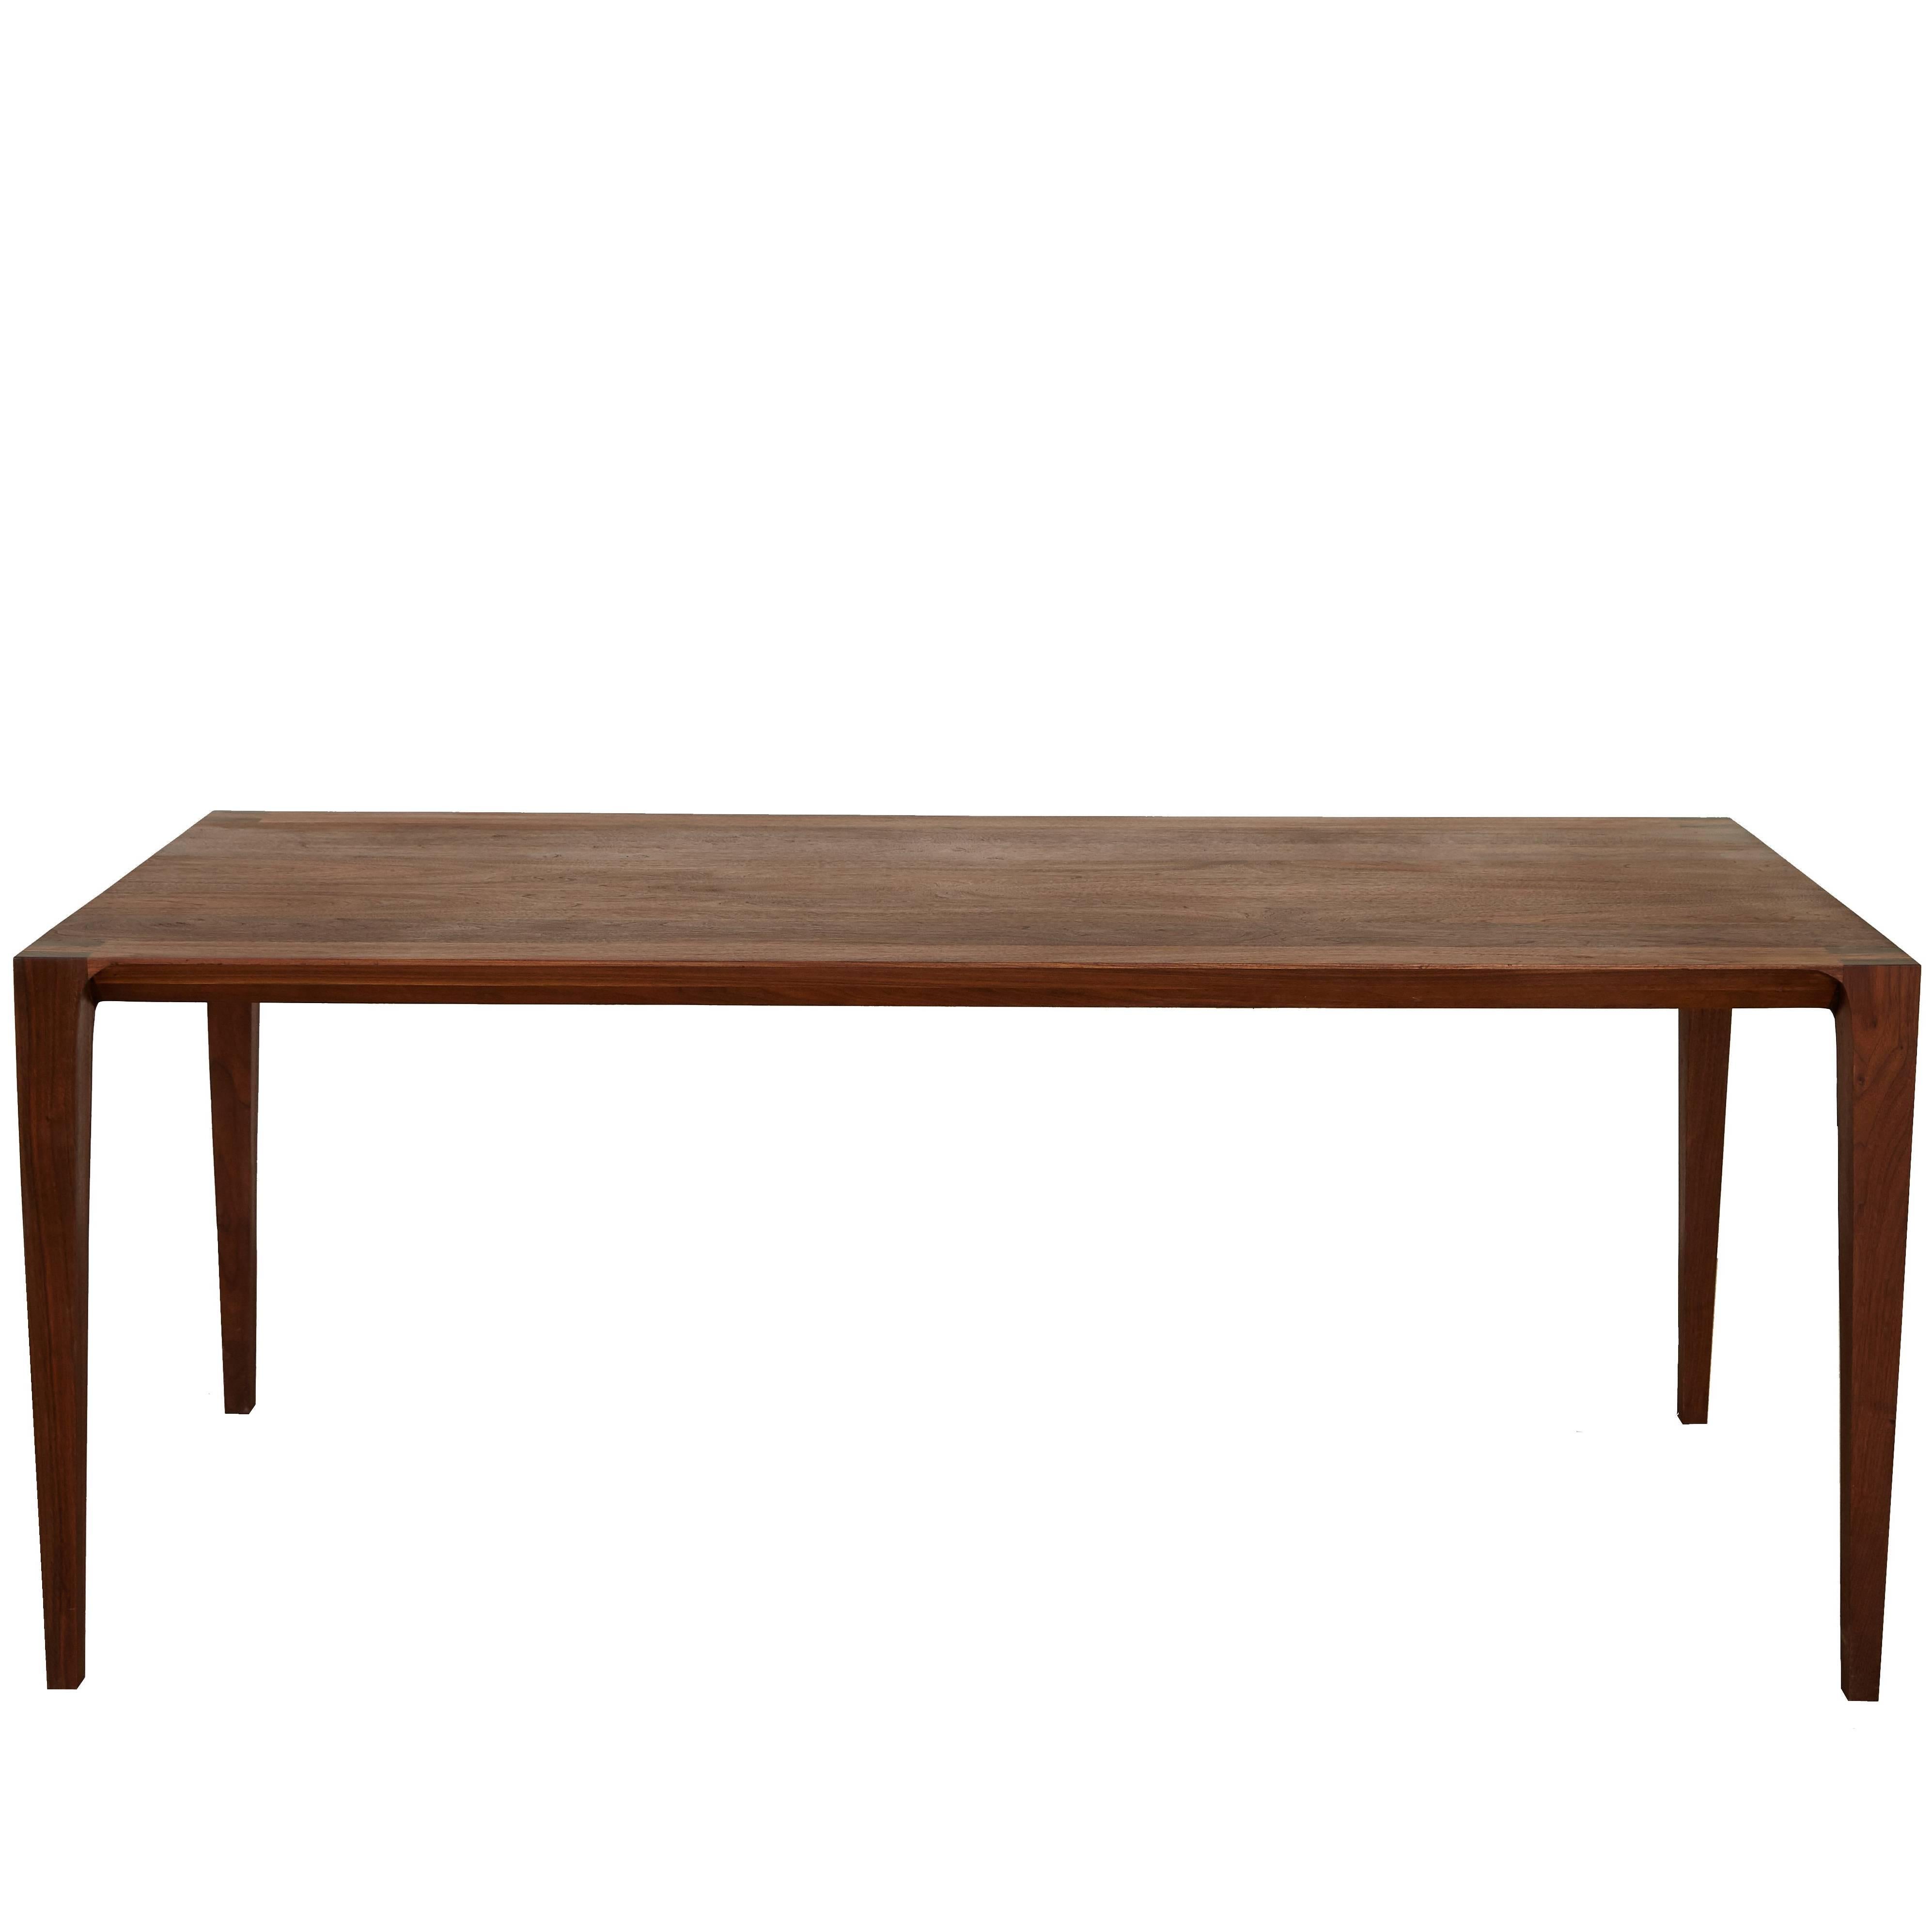 Solid Walnut Dining Table by Don Howell, circa 2017 For Sale